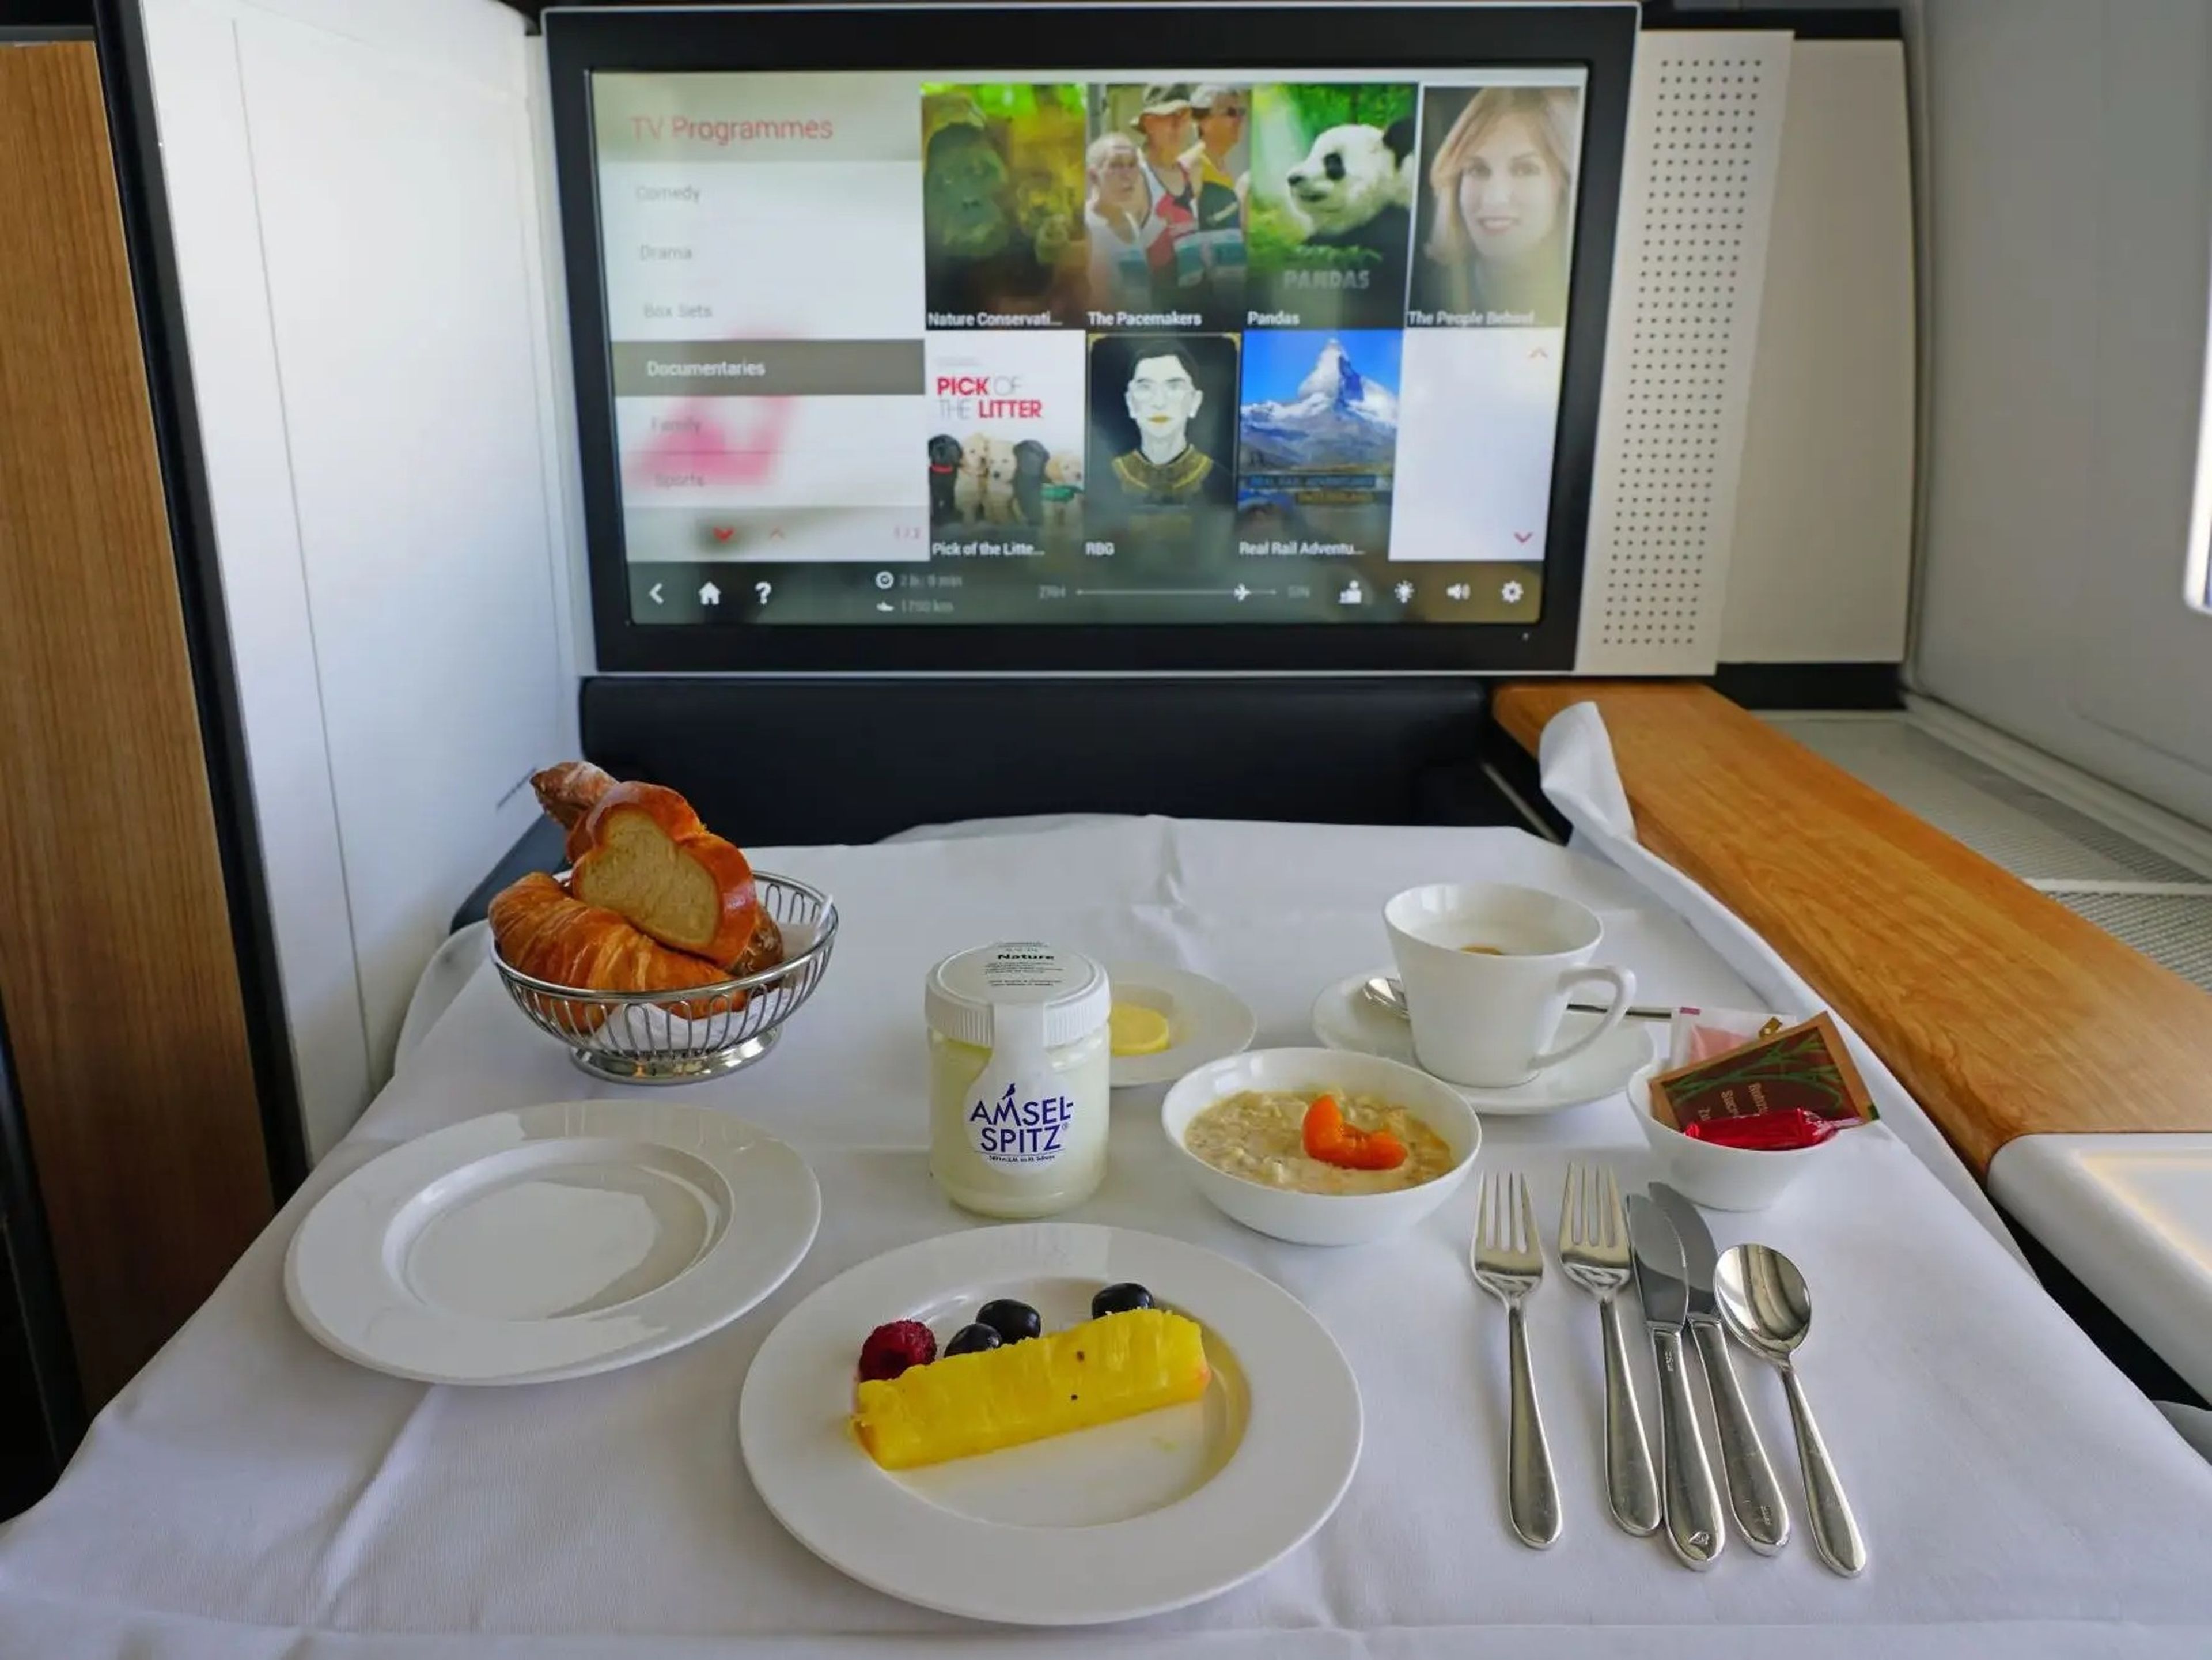 SWISS first class with with tray table full of food and television in view.